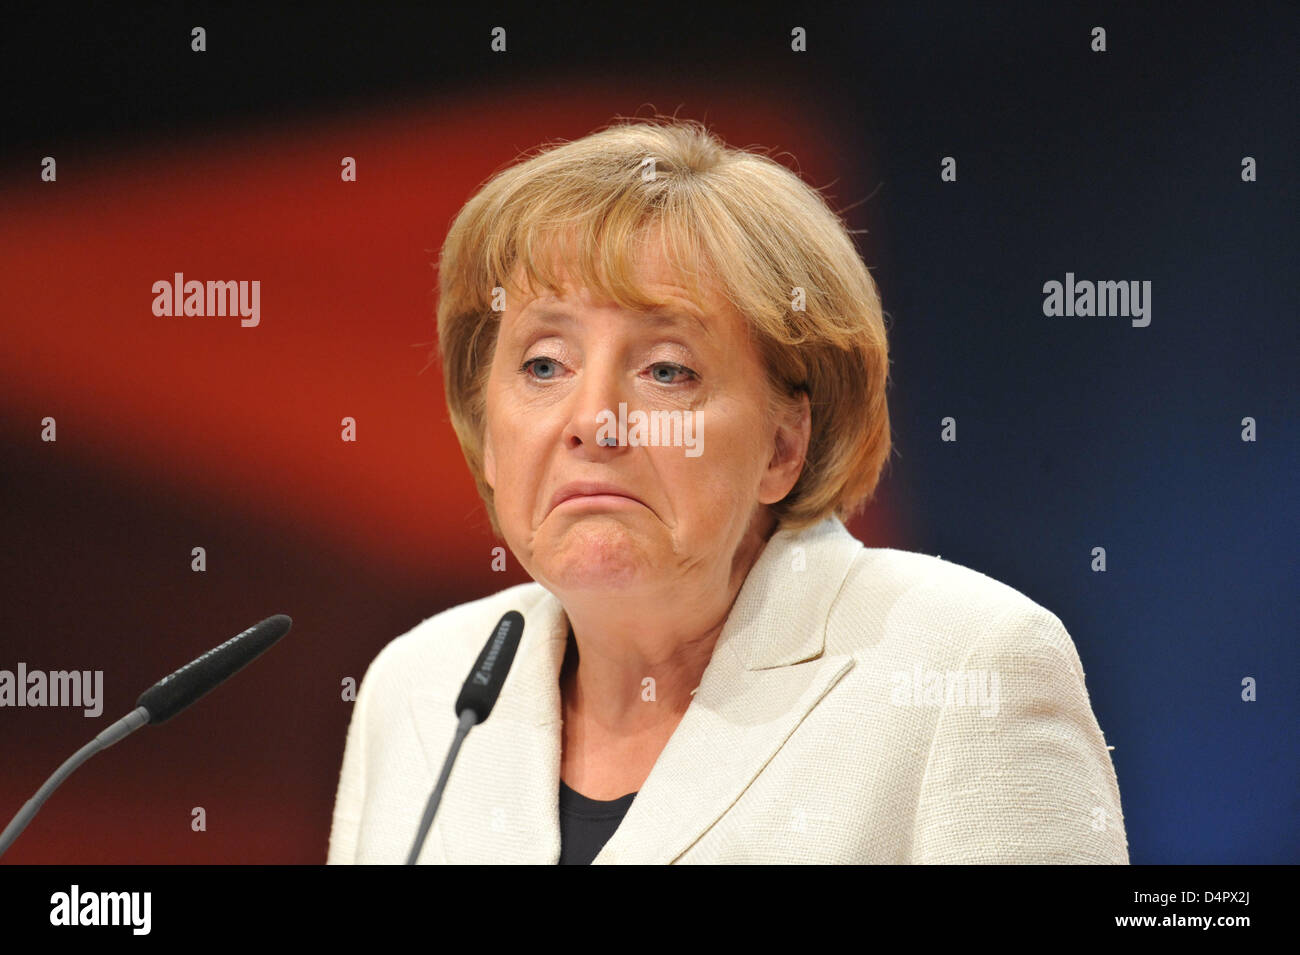 German Chancellor Angela Merkel delivers a speech as her Christian Democrats (CDU) party kicks off its election campaign in Duesseldorf, Germany, 06 September 2009. CDU enters the final phase of its election campaign for the federal elections held on 27 September. Photo: BERND THISSEN Stock Photo